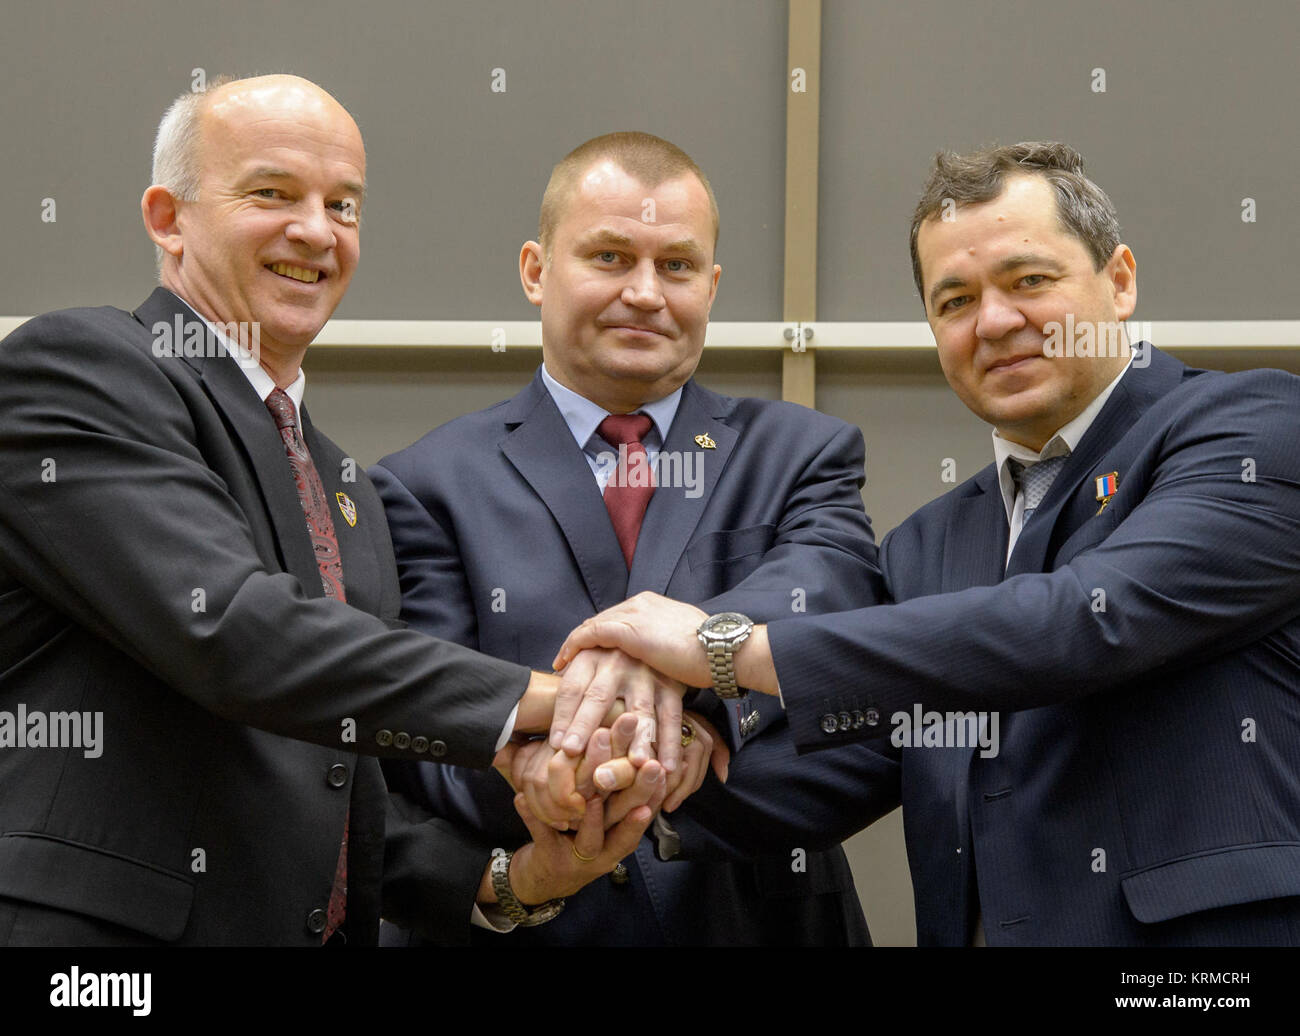 Expedition 47 NASA astronaut Jeff Williams, left, Russian cosmonaut Alexei Ovchinin of Roscosmos, center, and Russian cosmonaut Oleg Skripochka pose for a group photo during a crew press conference at the Gagarin Cosmonaut Training Center (GCTC), Friday, Feb. 26, 2016, in Star City, Russia. Photo Credit: (NASA/Bill Ingalls) Expedition 47 Preflight (NHQ201602260021) Stock Photo